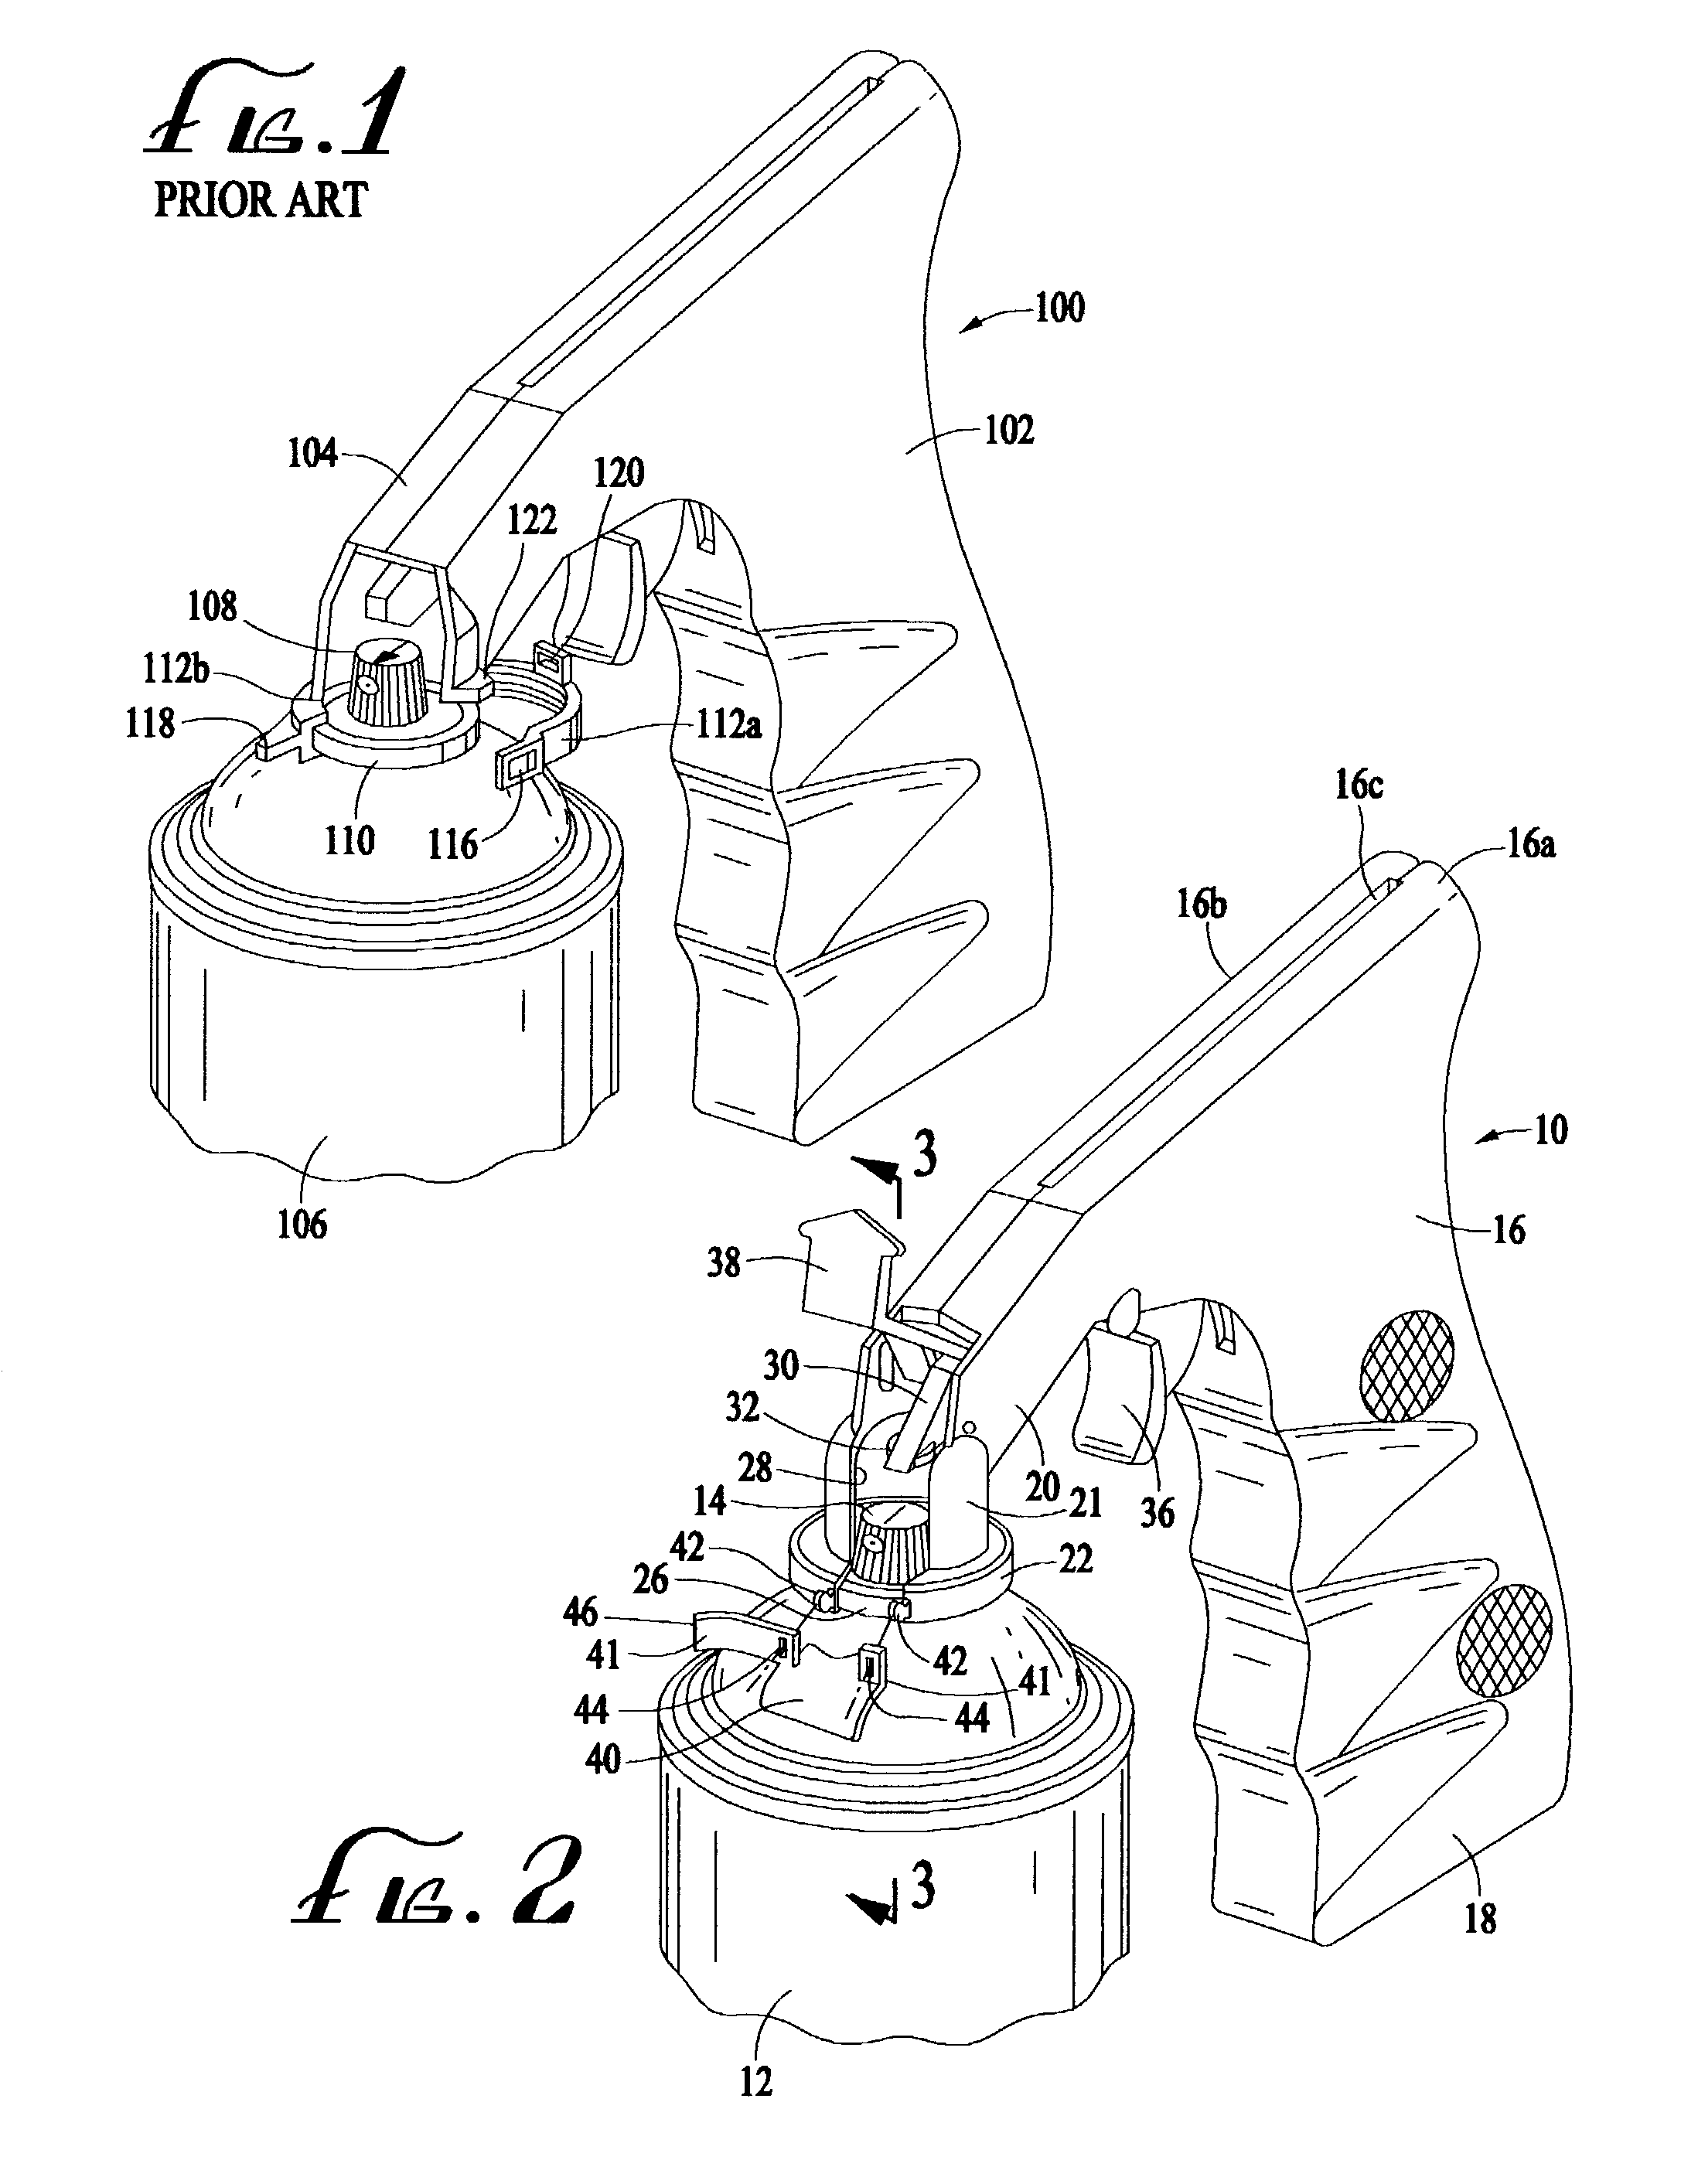 Spray can holding and actuating device